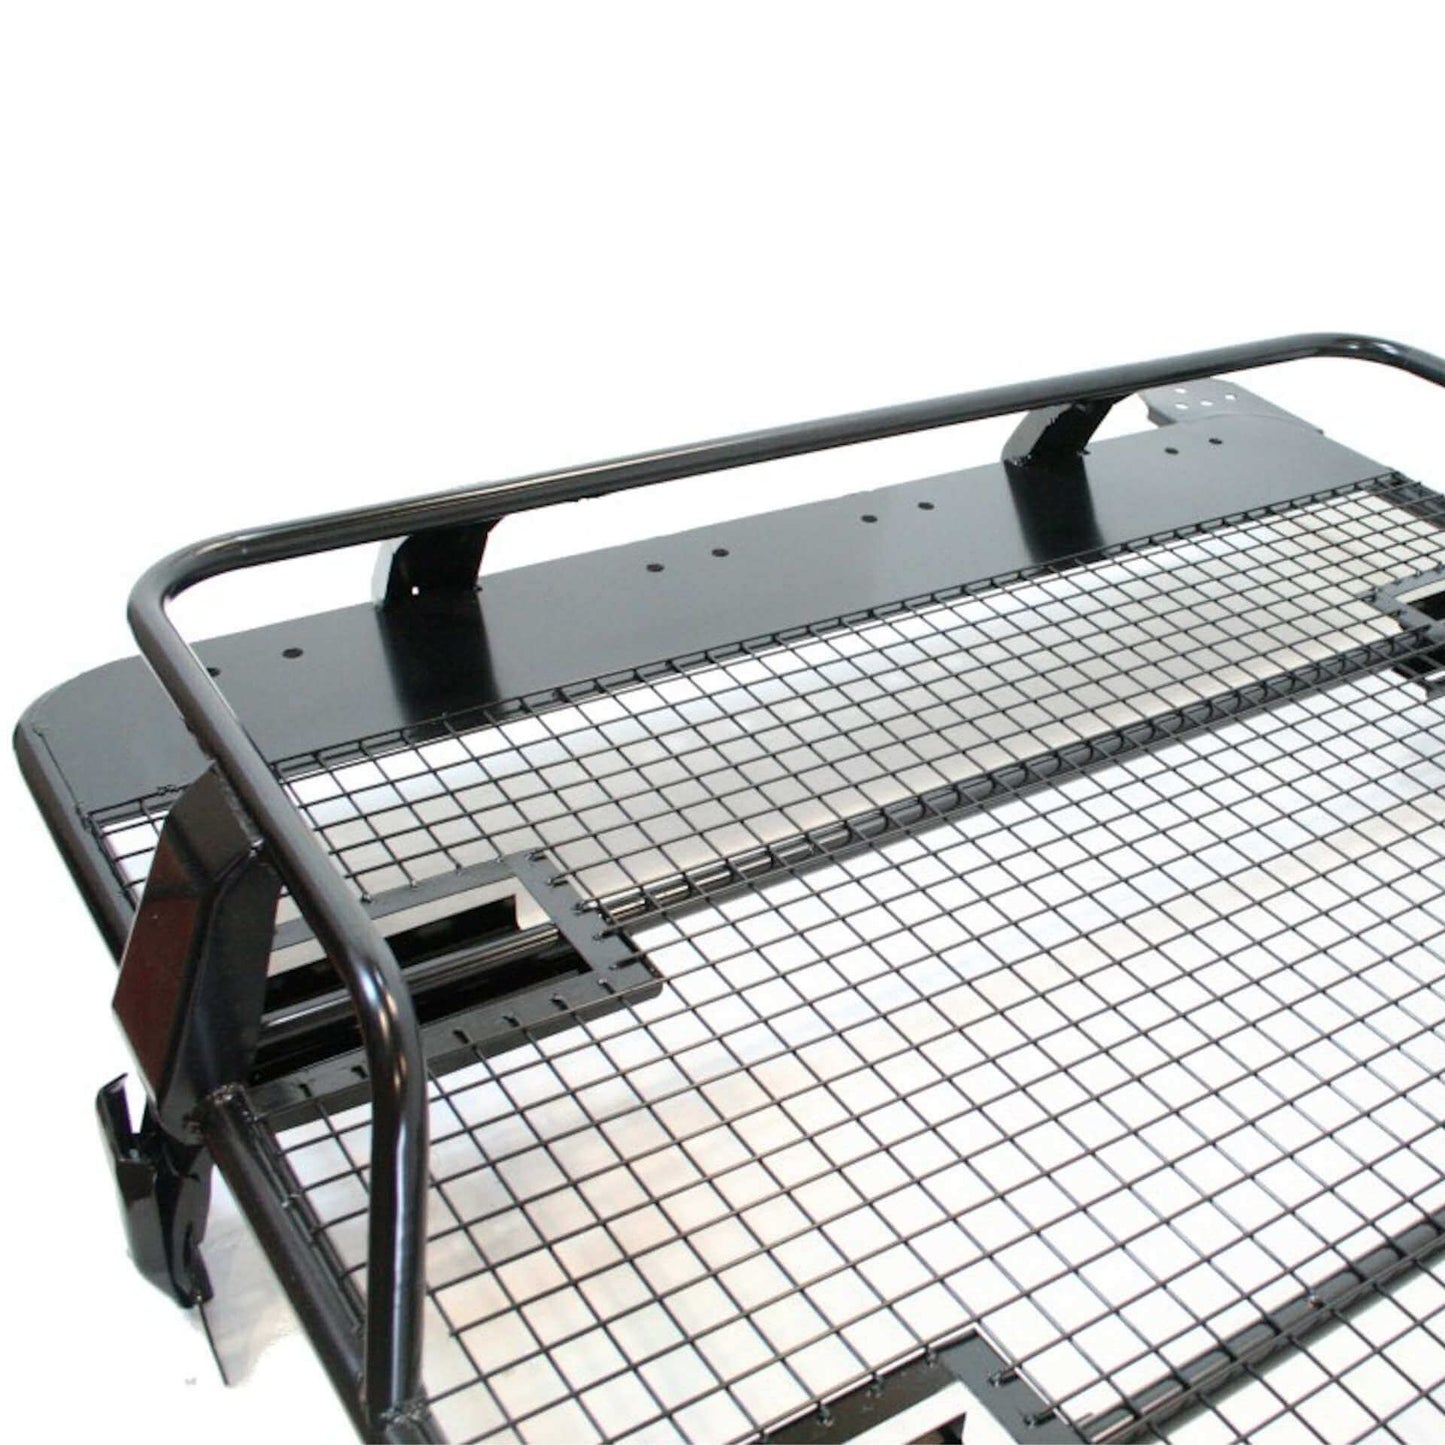 Expedition Steel Front Basket Roof Rack for Land Rover Discovery 1 and 2